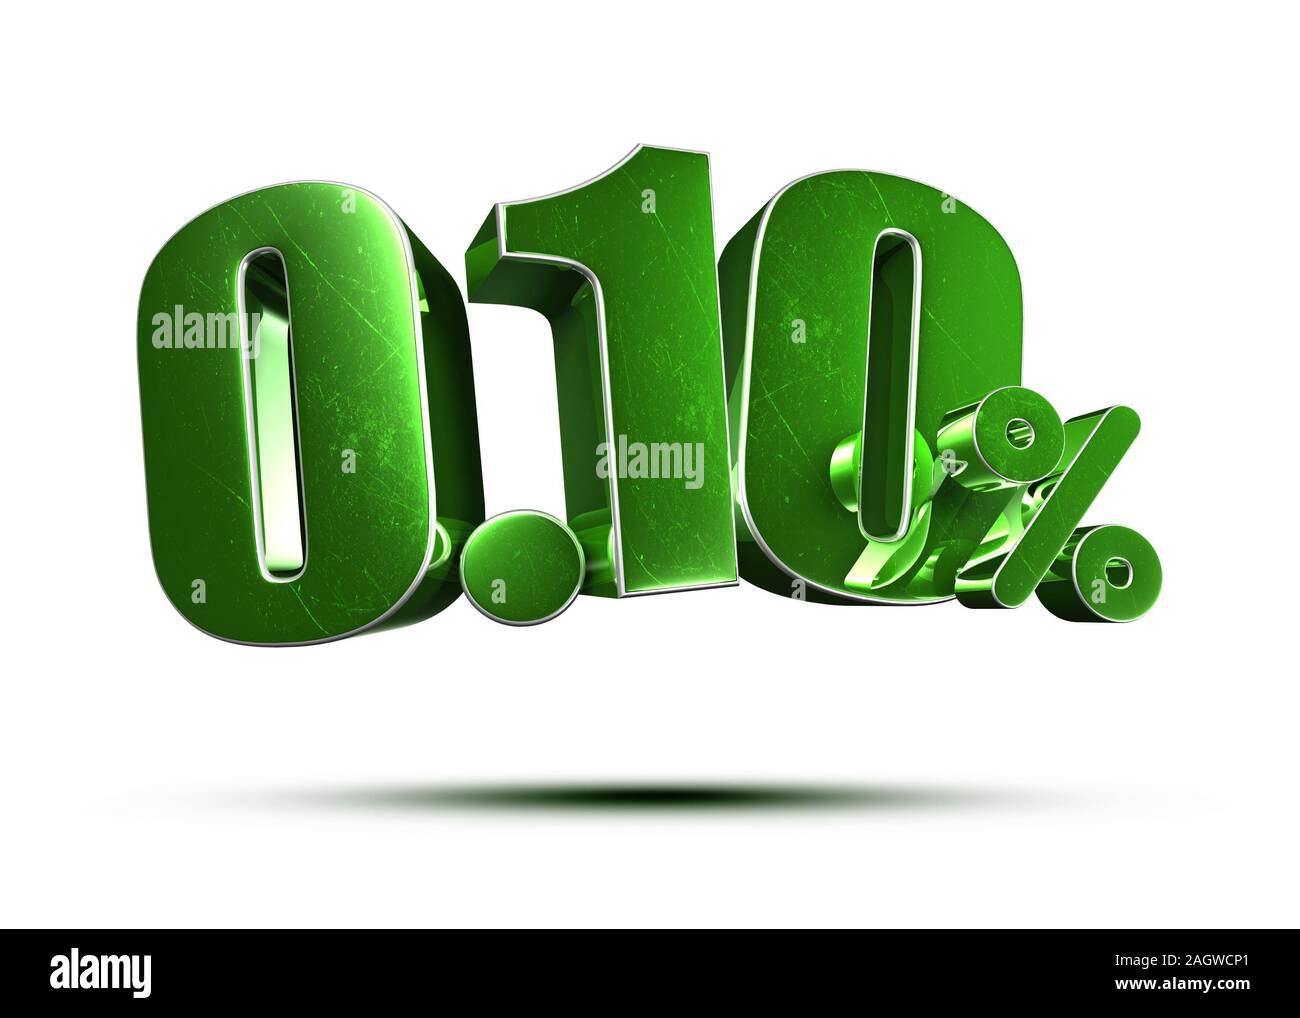 3D illustration 0.10 percent green on a white background.(with Clipping Path). Stock Photo